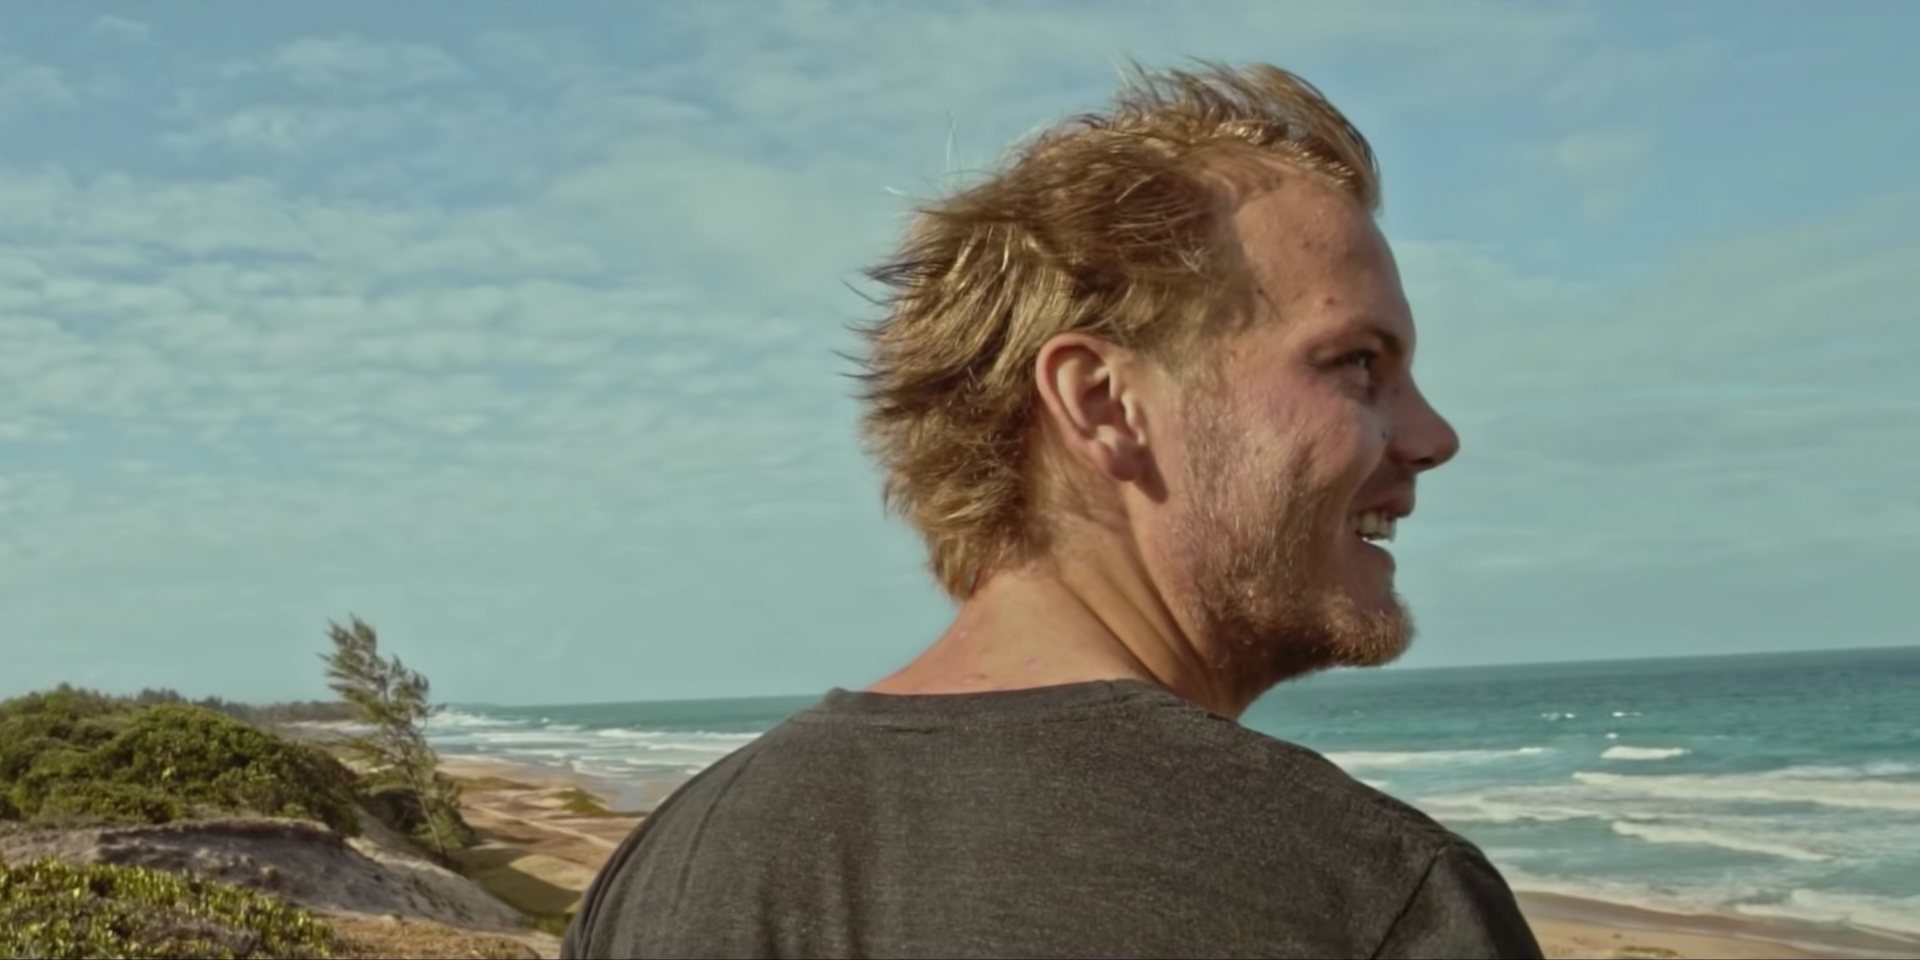 Watch previously unseen footage of Avicii exploring Madagascar in new music video for 'Heaven' 